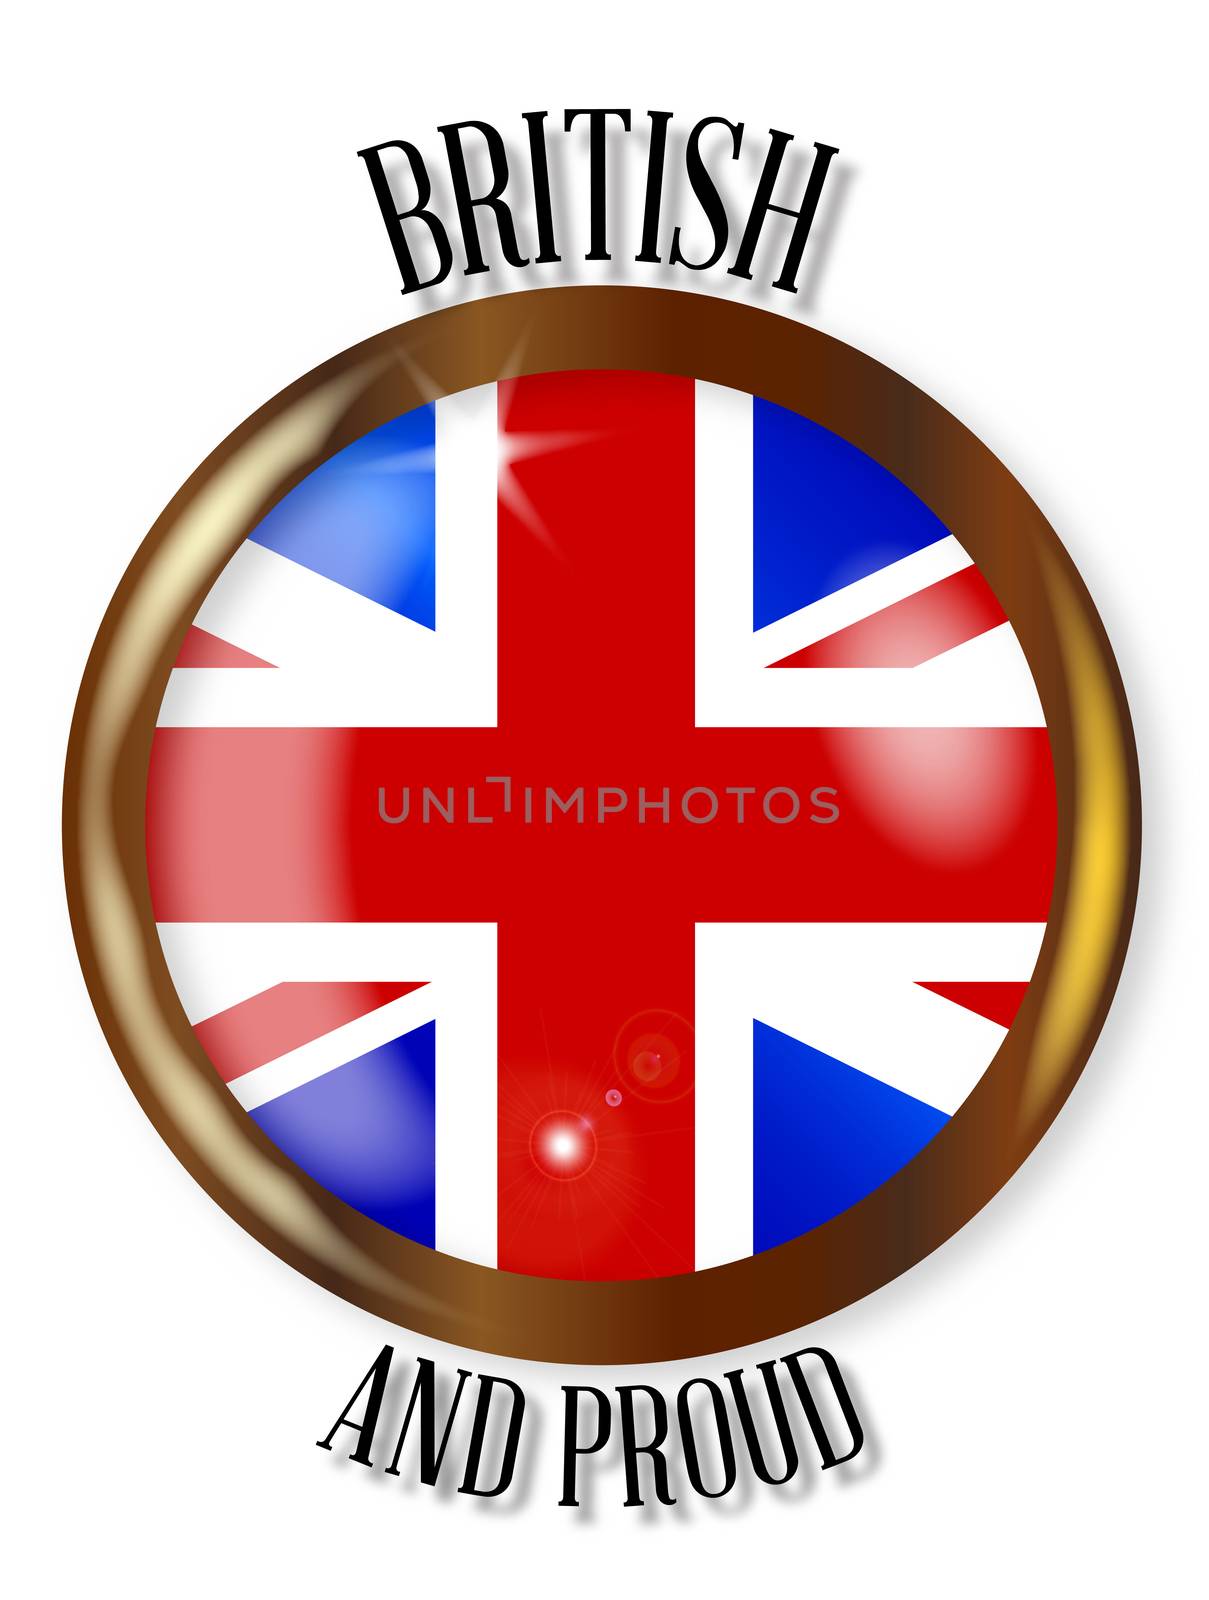 British and Proud flag button with a circular border over a white background